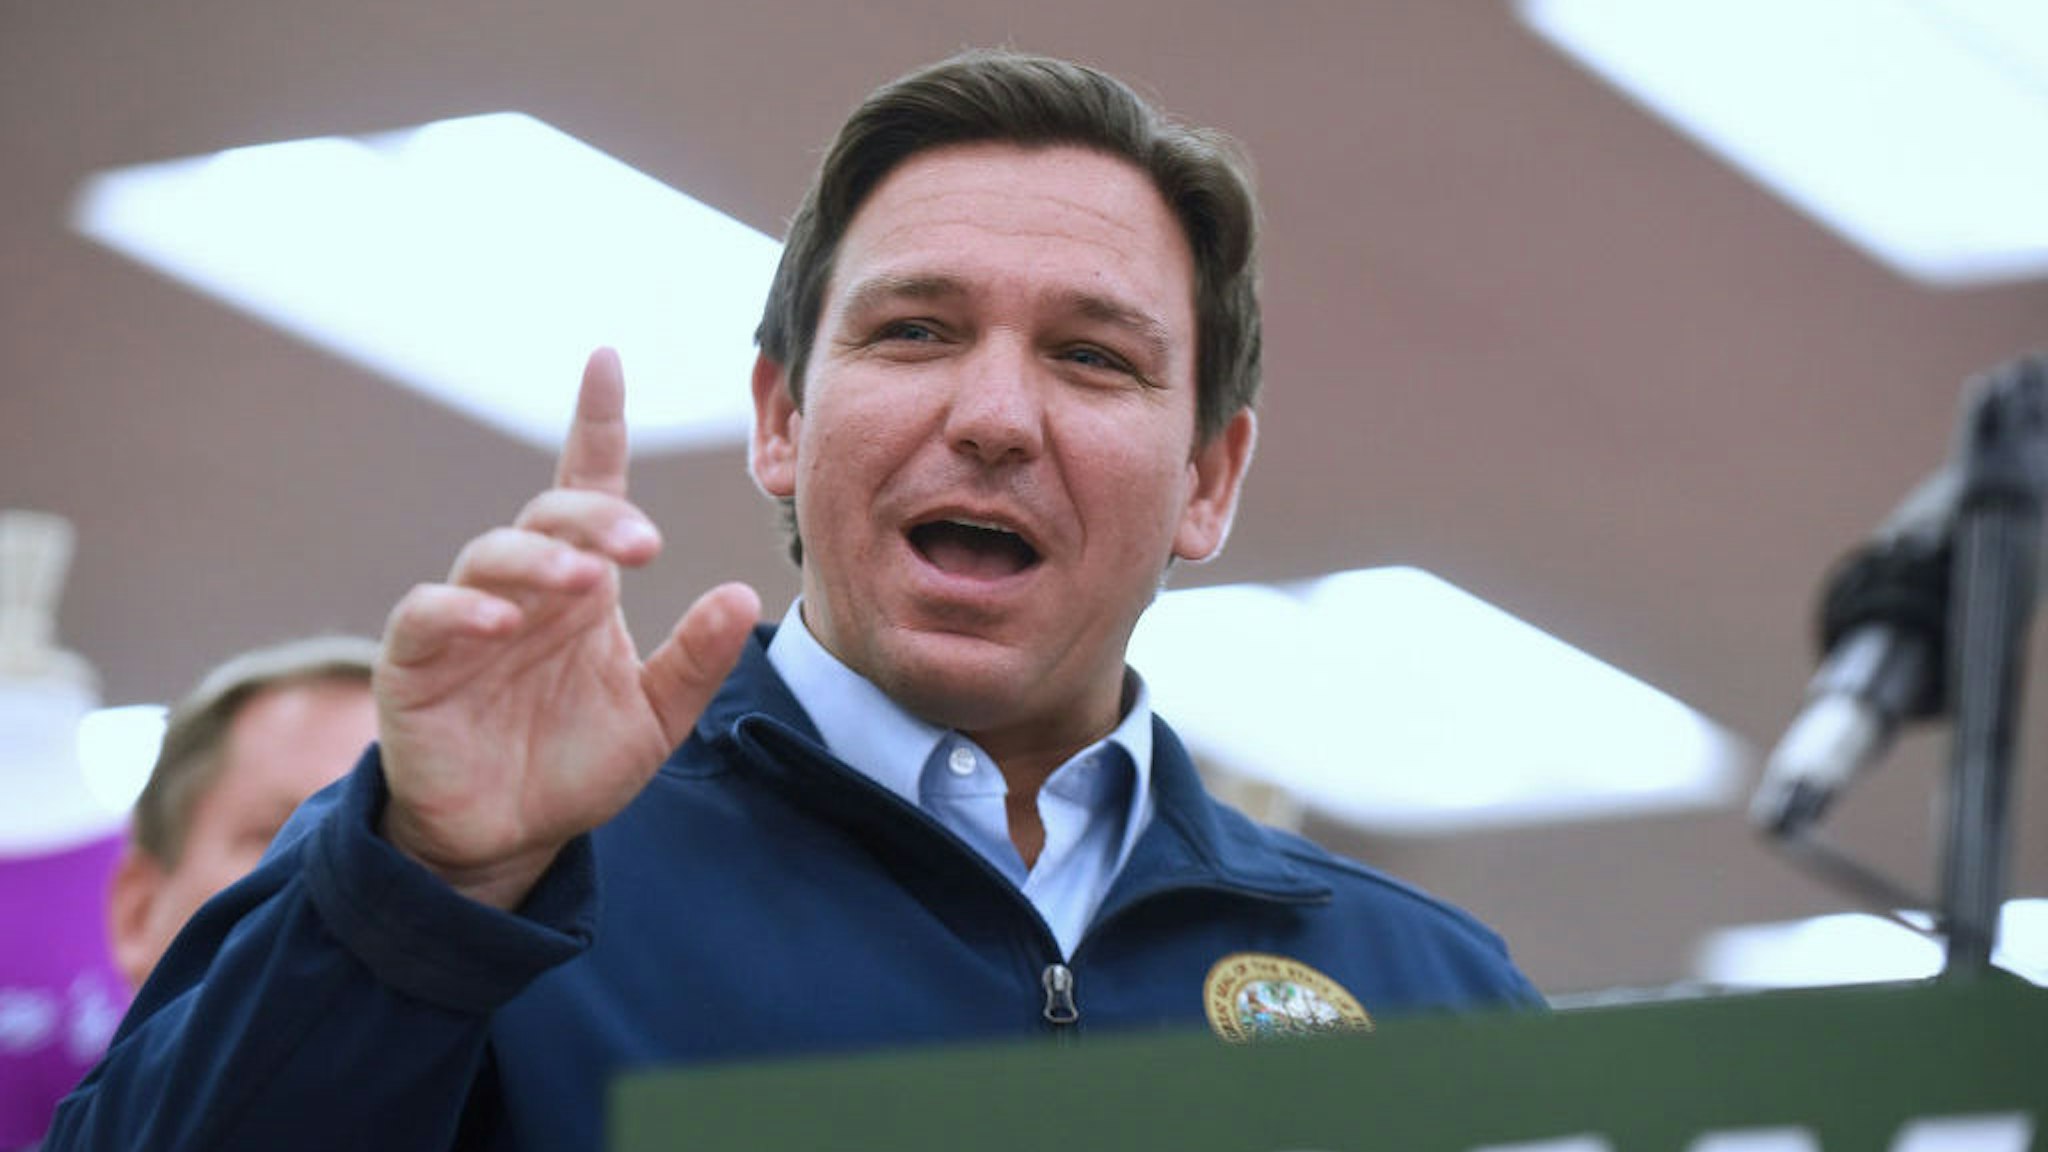 DAYTONA BEACH, FLORIDA, UNITED STATES - 2021/11/22: Florida Gov. Ron DeSantis speaks at a press conference at Buc-ee's travel center, where he announced his proposal of more than $1 billion in gas tax relief for Floridians in response to rising gas prices caused by inflation. DeSantis is proposing to the Florida legislature a five-month gas tax holiday. (Photo by Paul Hennessy/SOPA Images/LightRocket via Getty Images)